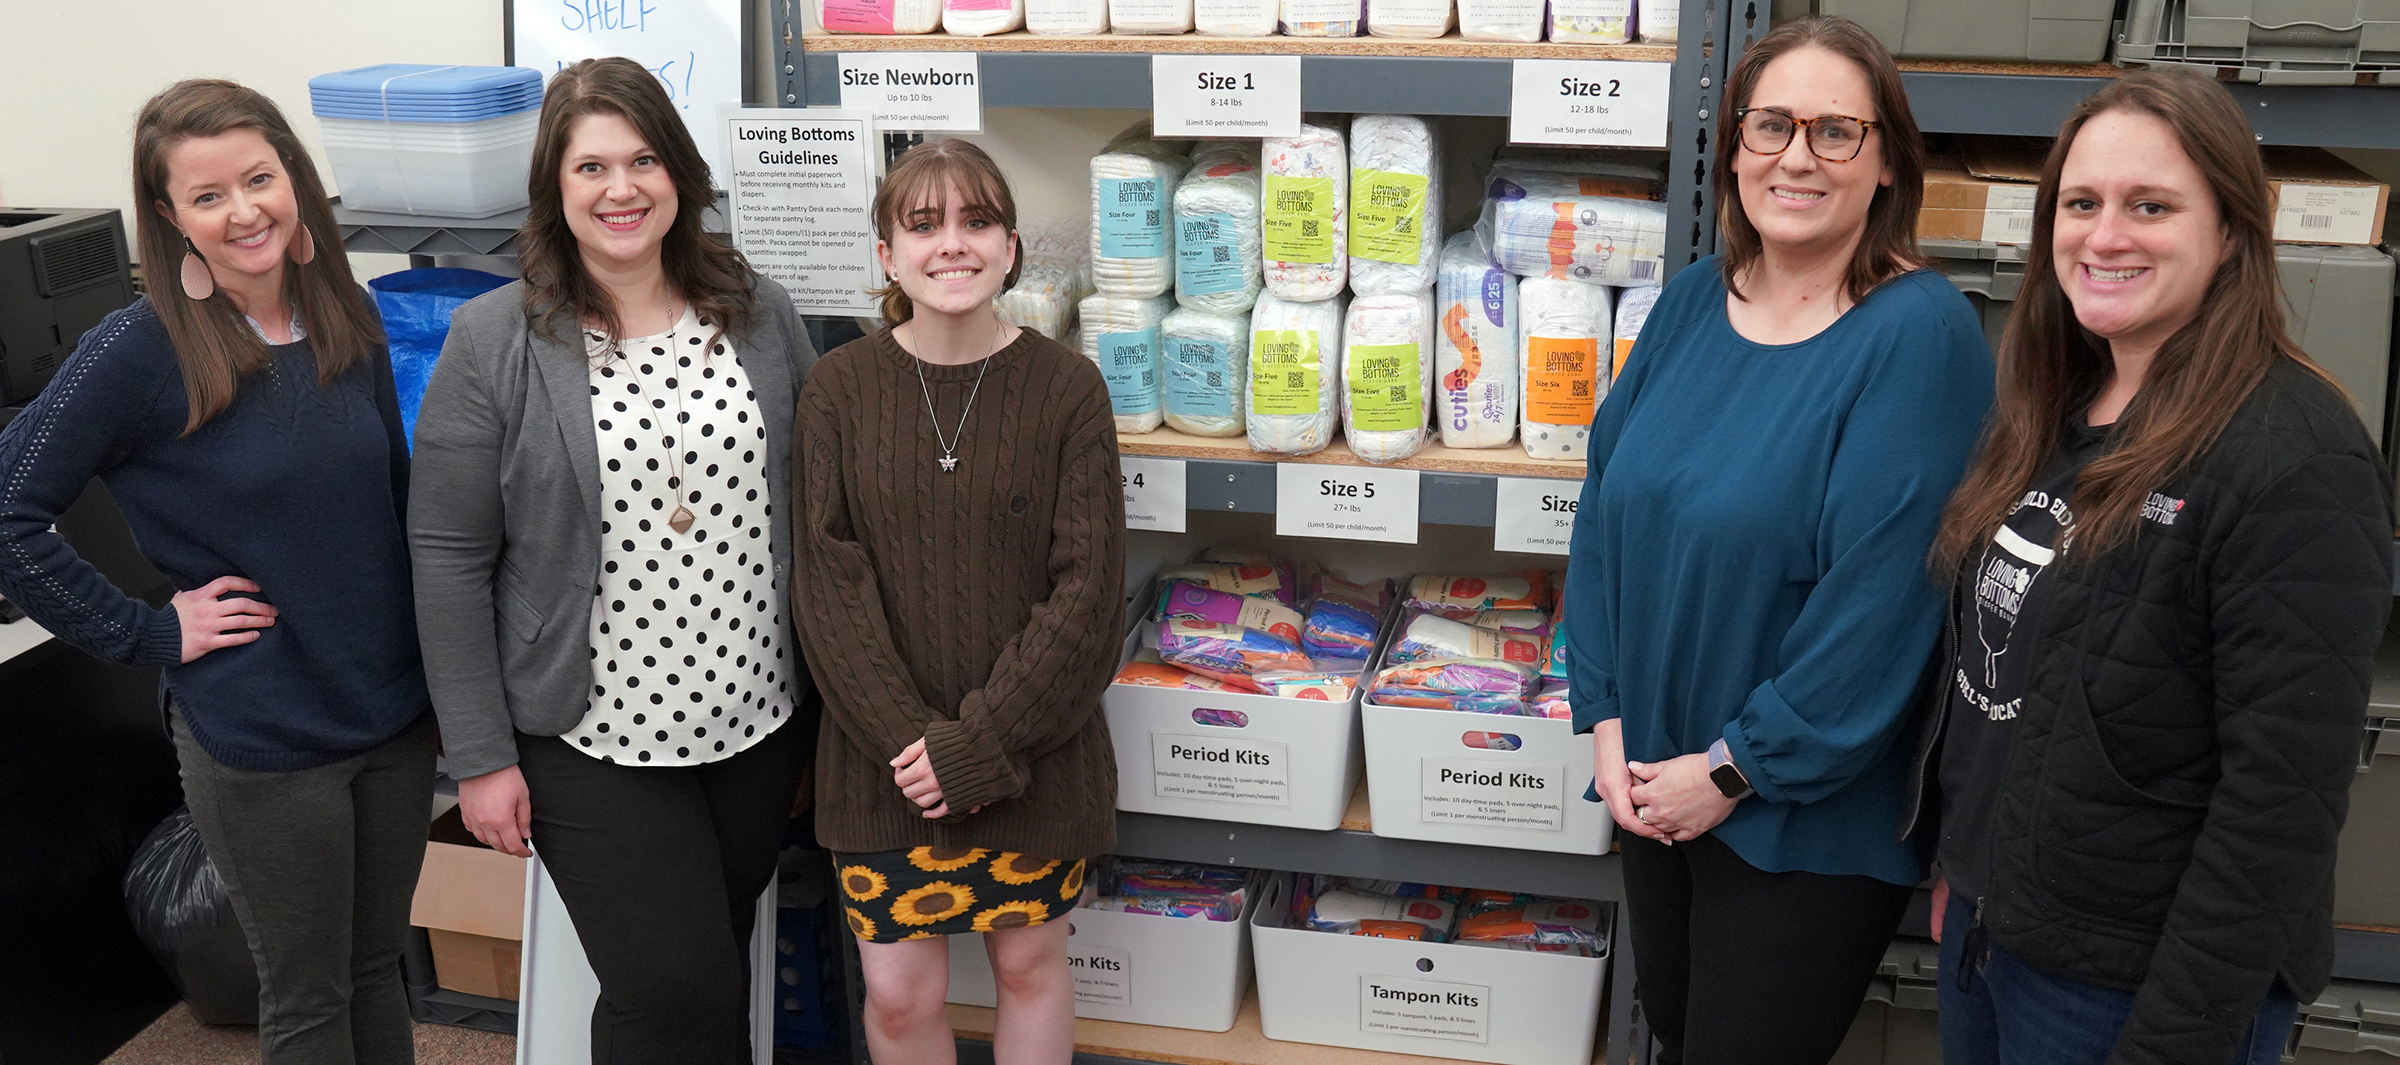 Autumn Scott, Carl Sandburg College associate vice president of academic planning; Genny Stevens, student life coordinator; student Samantha Cozad; Lee Ann Porter, Loving Bottoms Diaper Bank founder and executive director; and Loving Bottoms program coordinator Jenny Dowsey stand for a photo in front of Sandburg’s stock of feminine products, diapers and wipes in its Resource Room Campus Food Pantry.